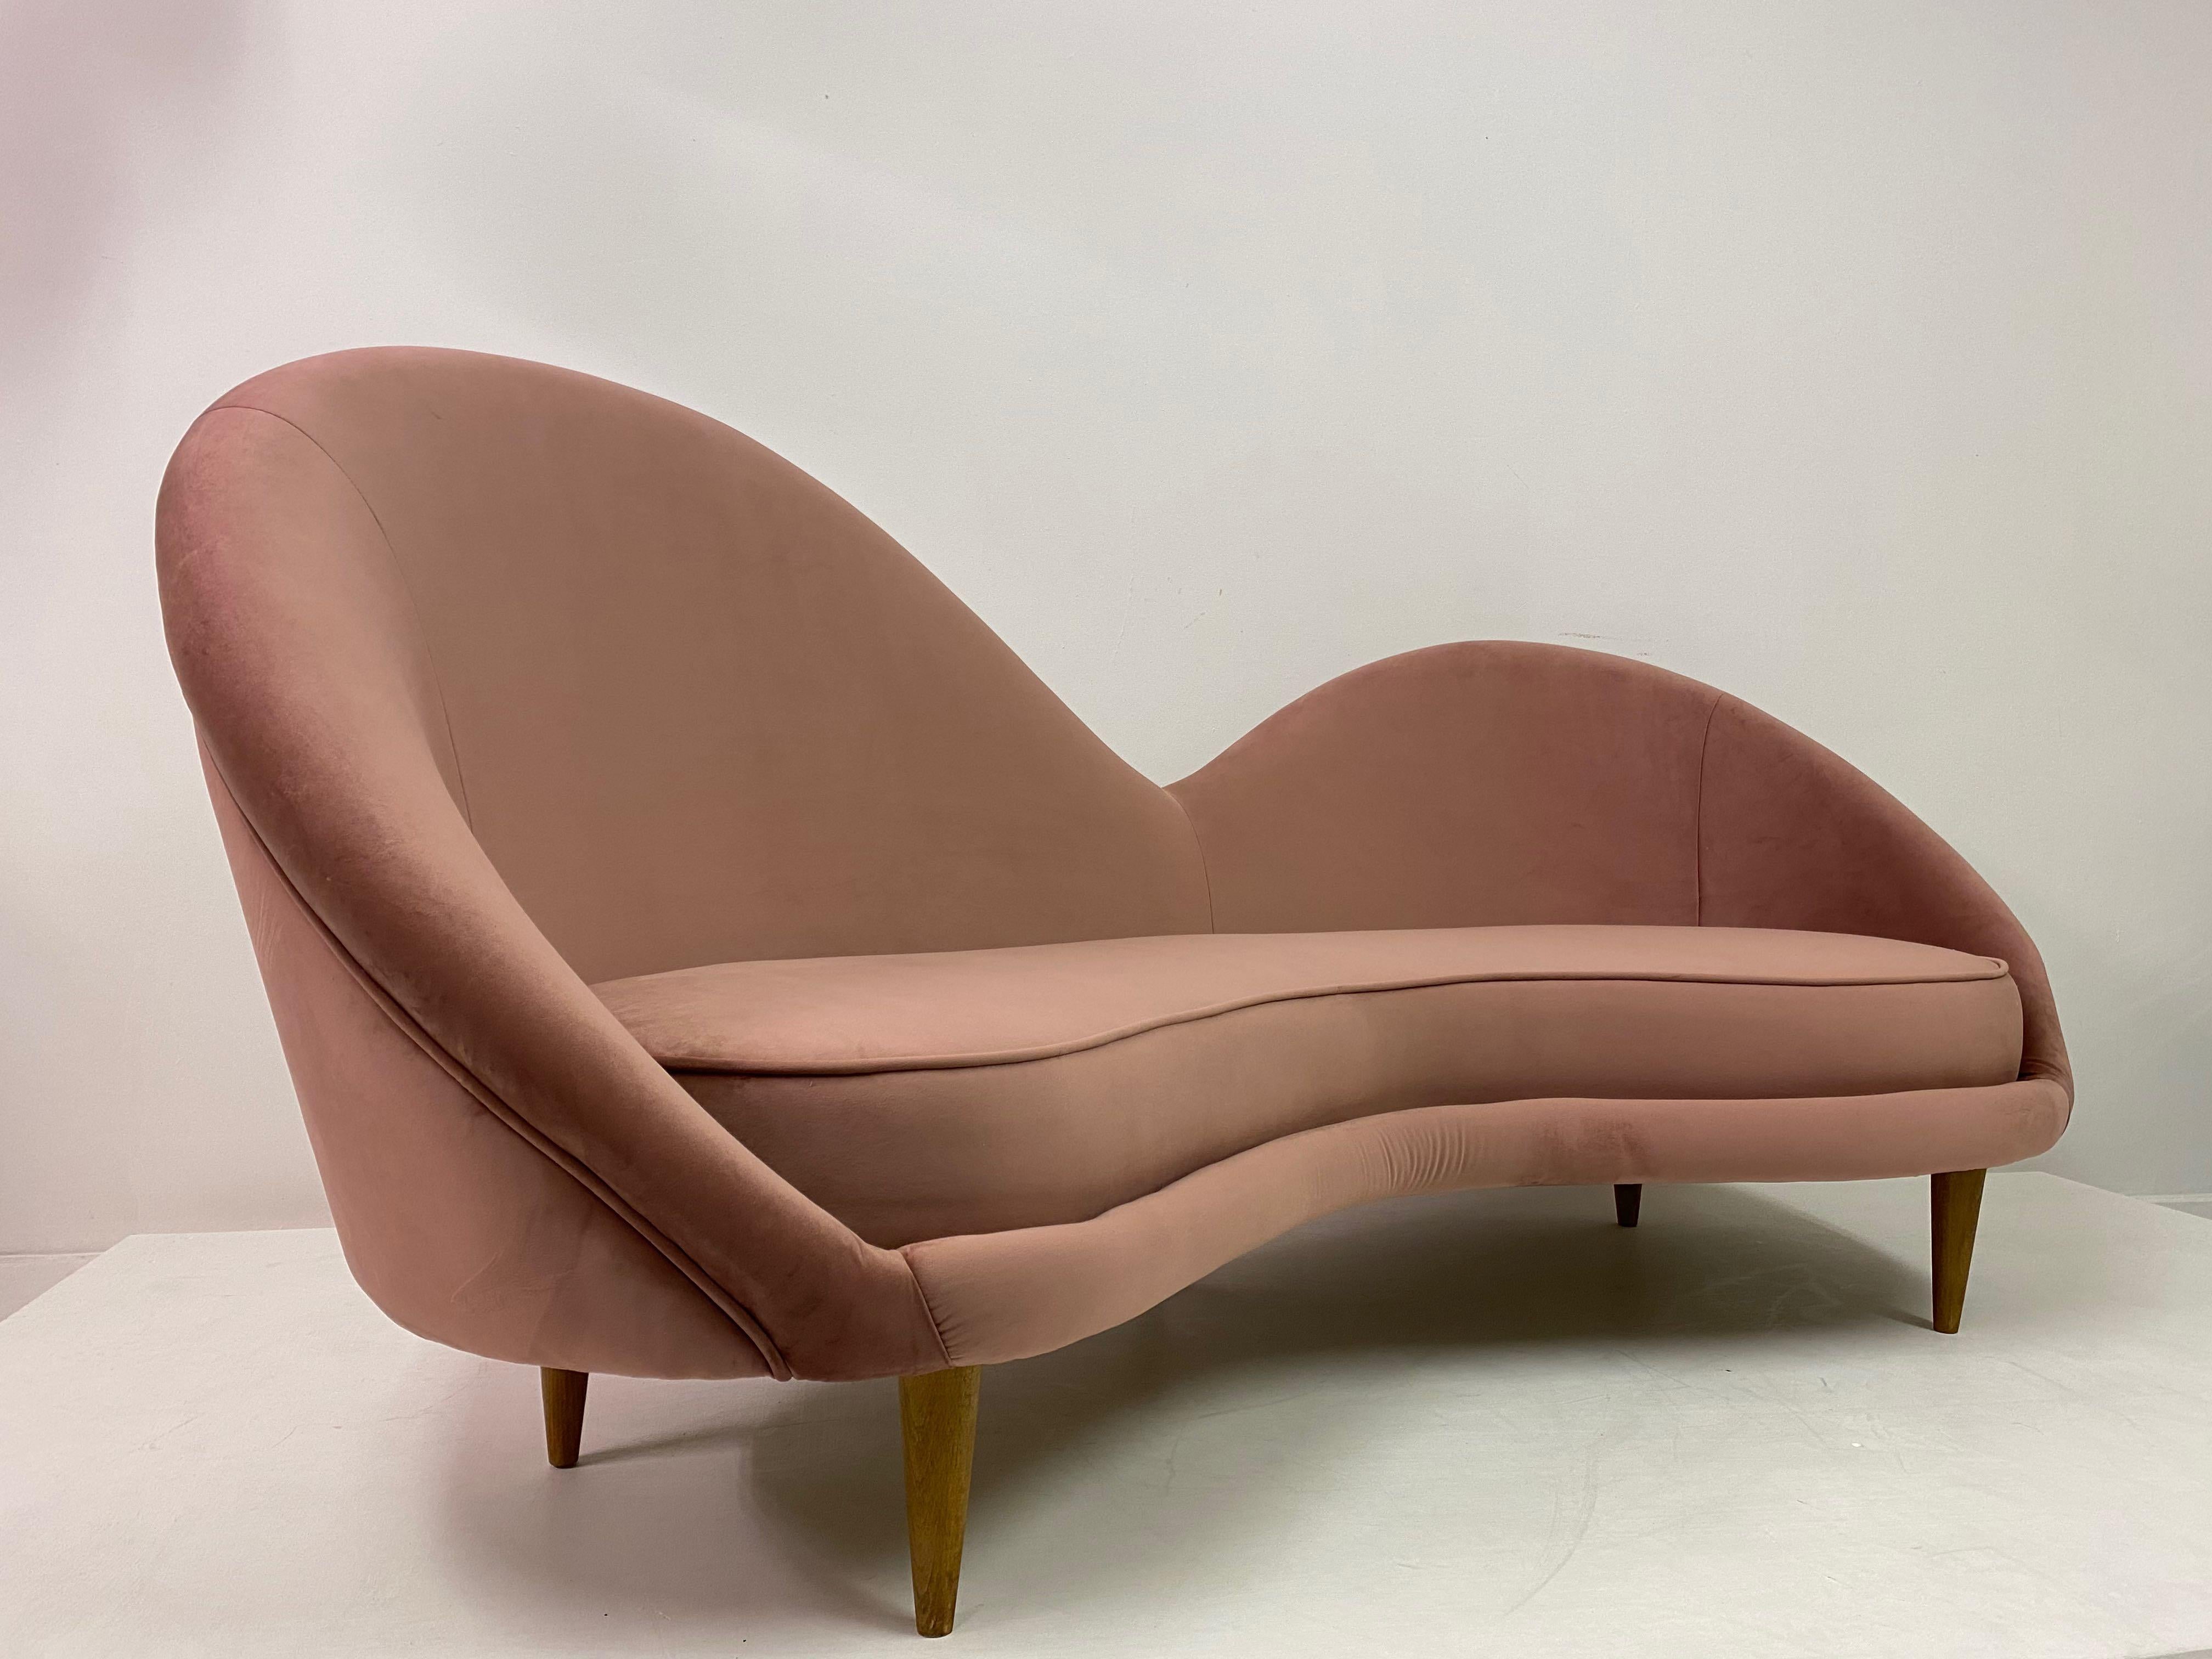 Contemporary 1950s Style Italian Sofa in Soft Pink Velvet For Sale